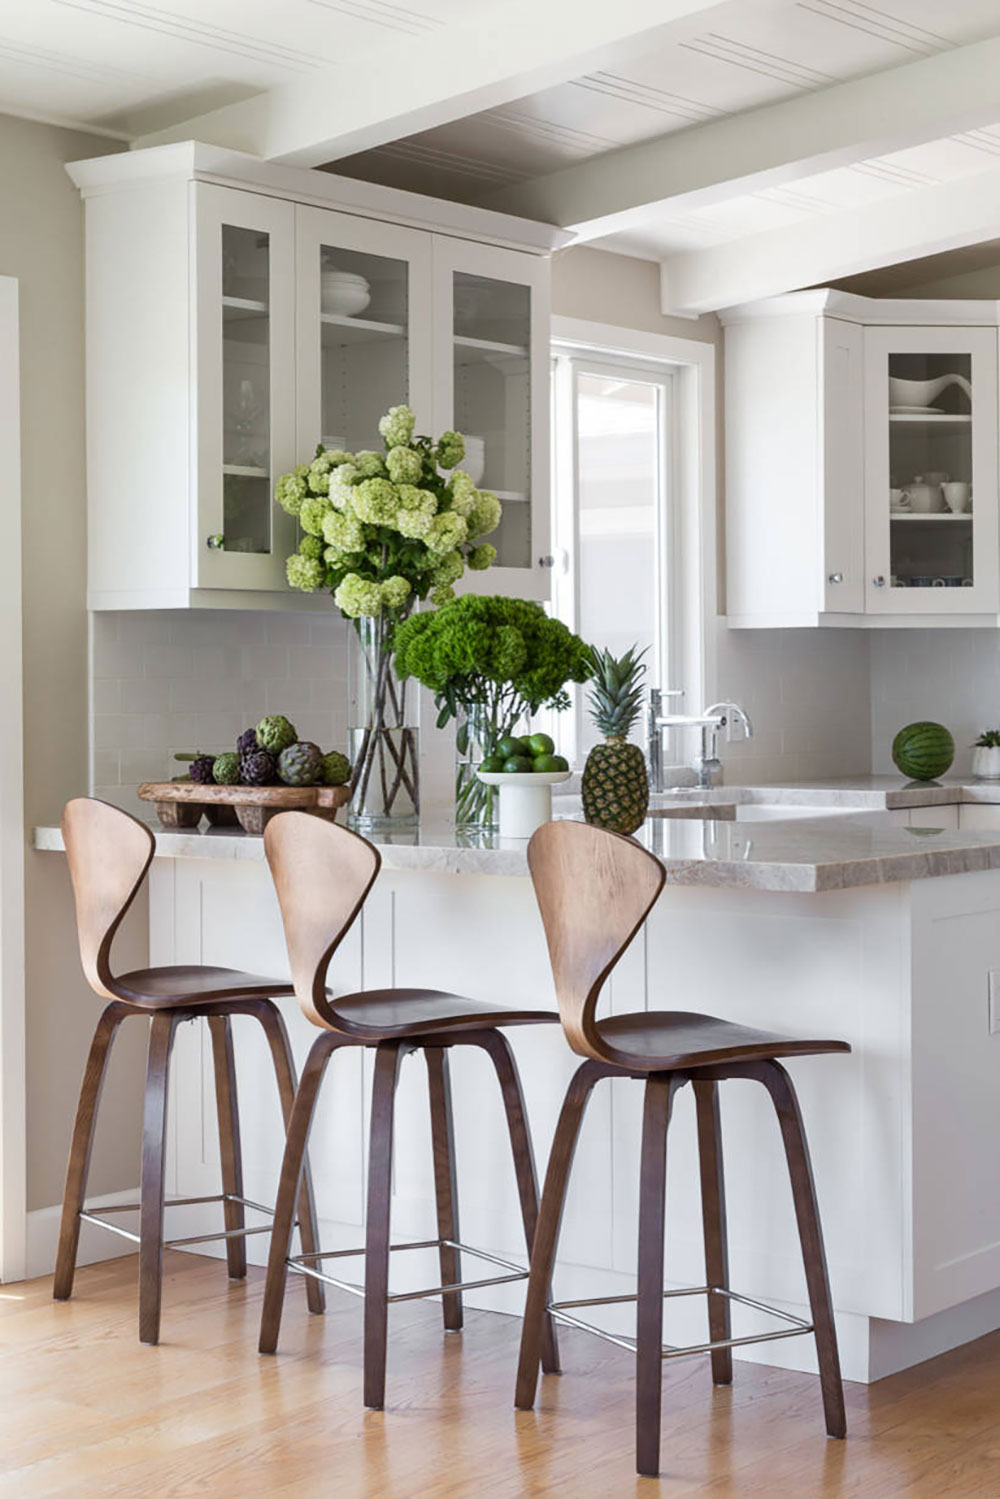 Kimberley-Harrison-Interiors How To Style Glass Kitchen Cabinets To Look Stunning